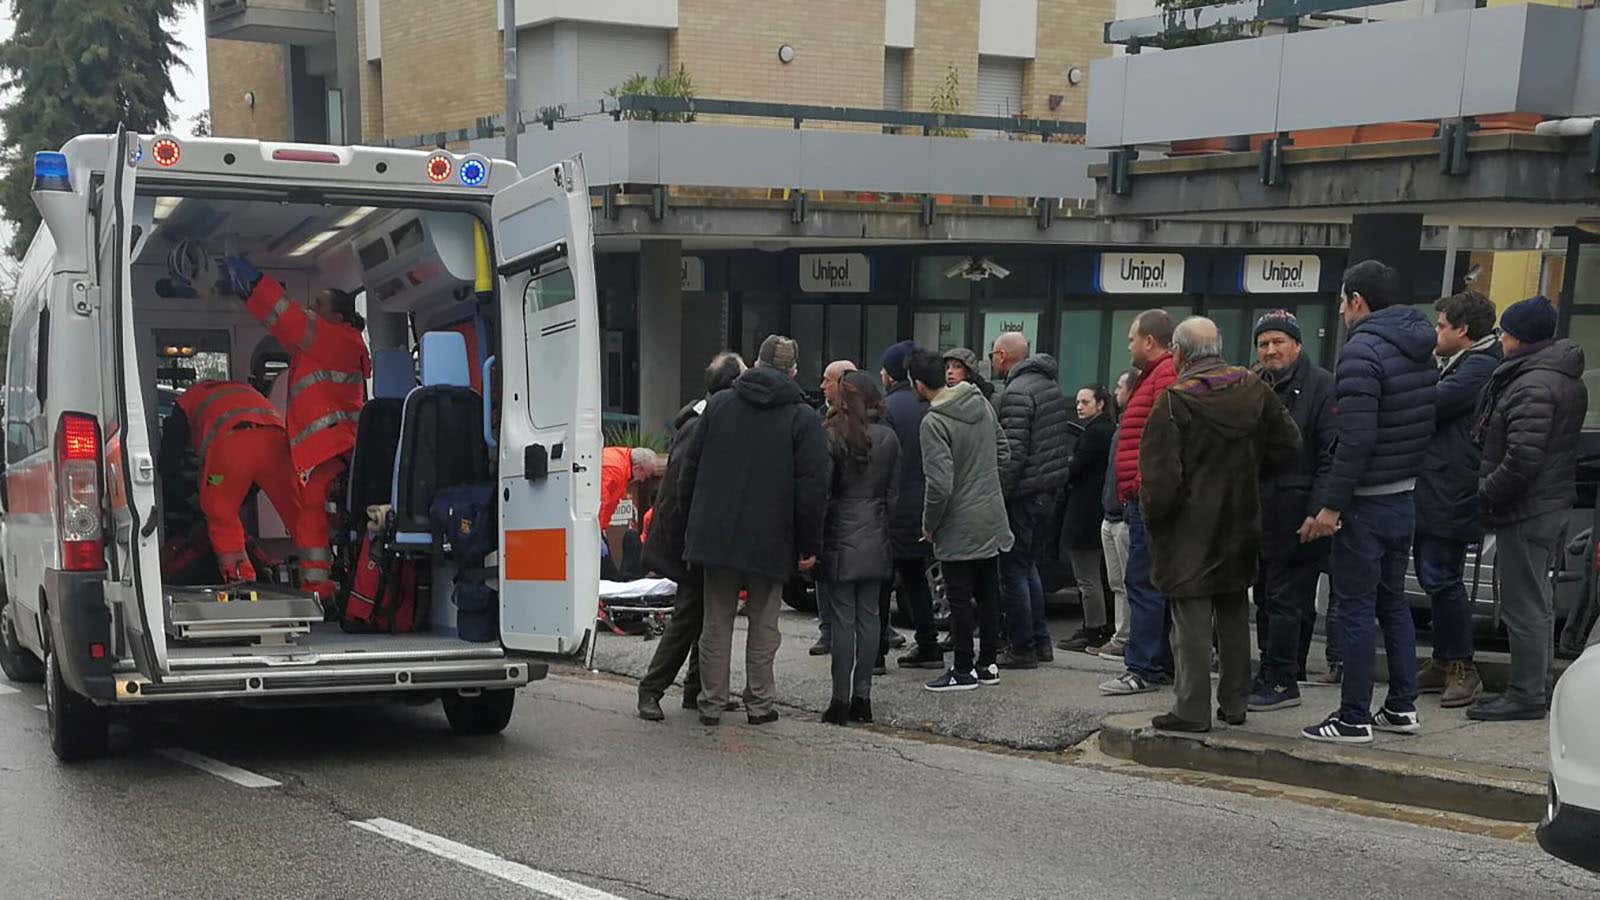 The scene as a victim is treated in Macerata.